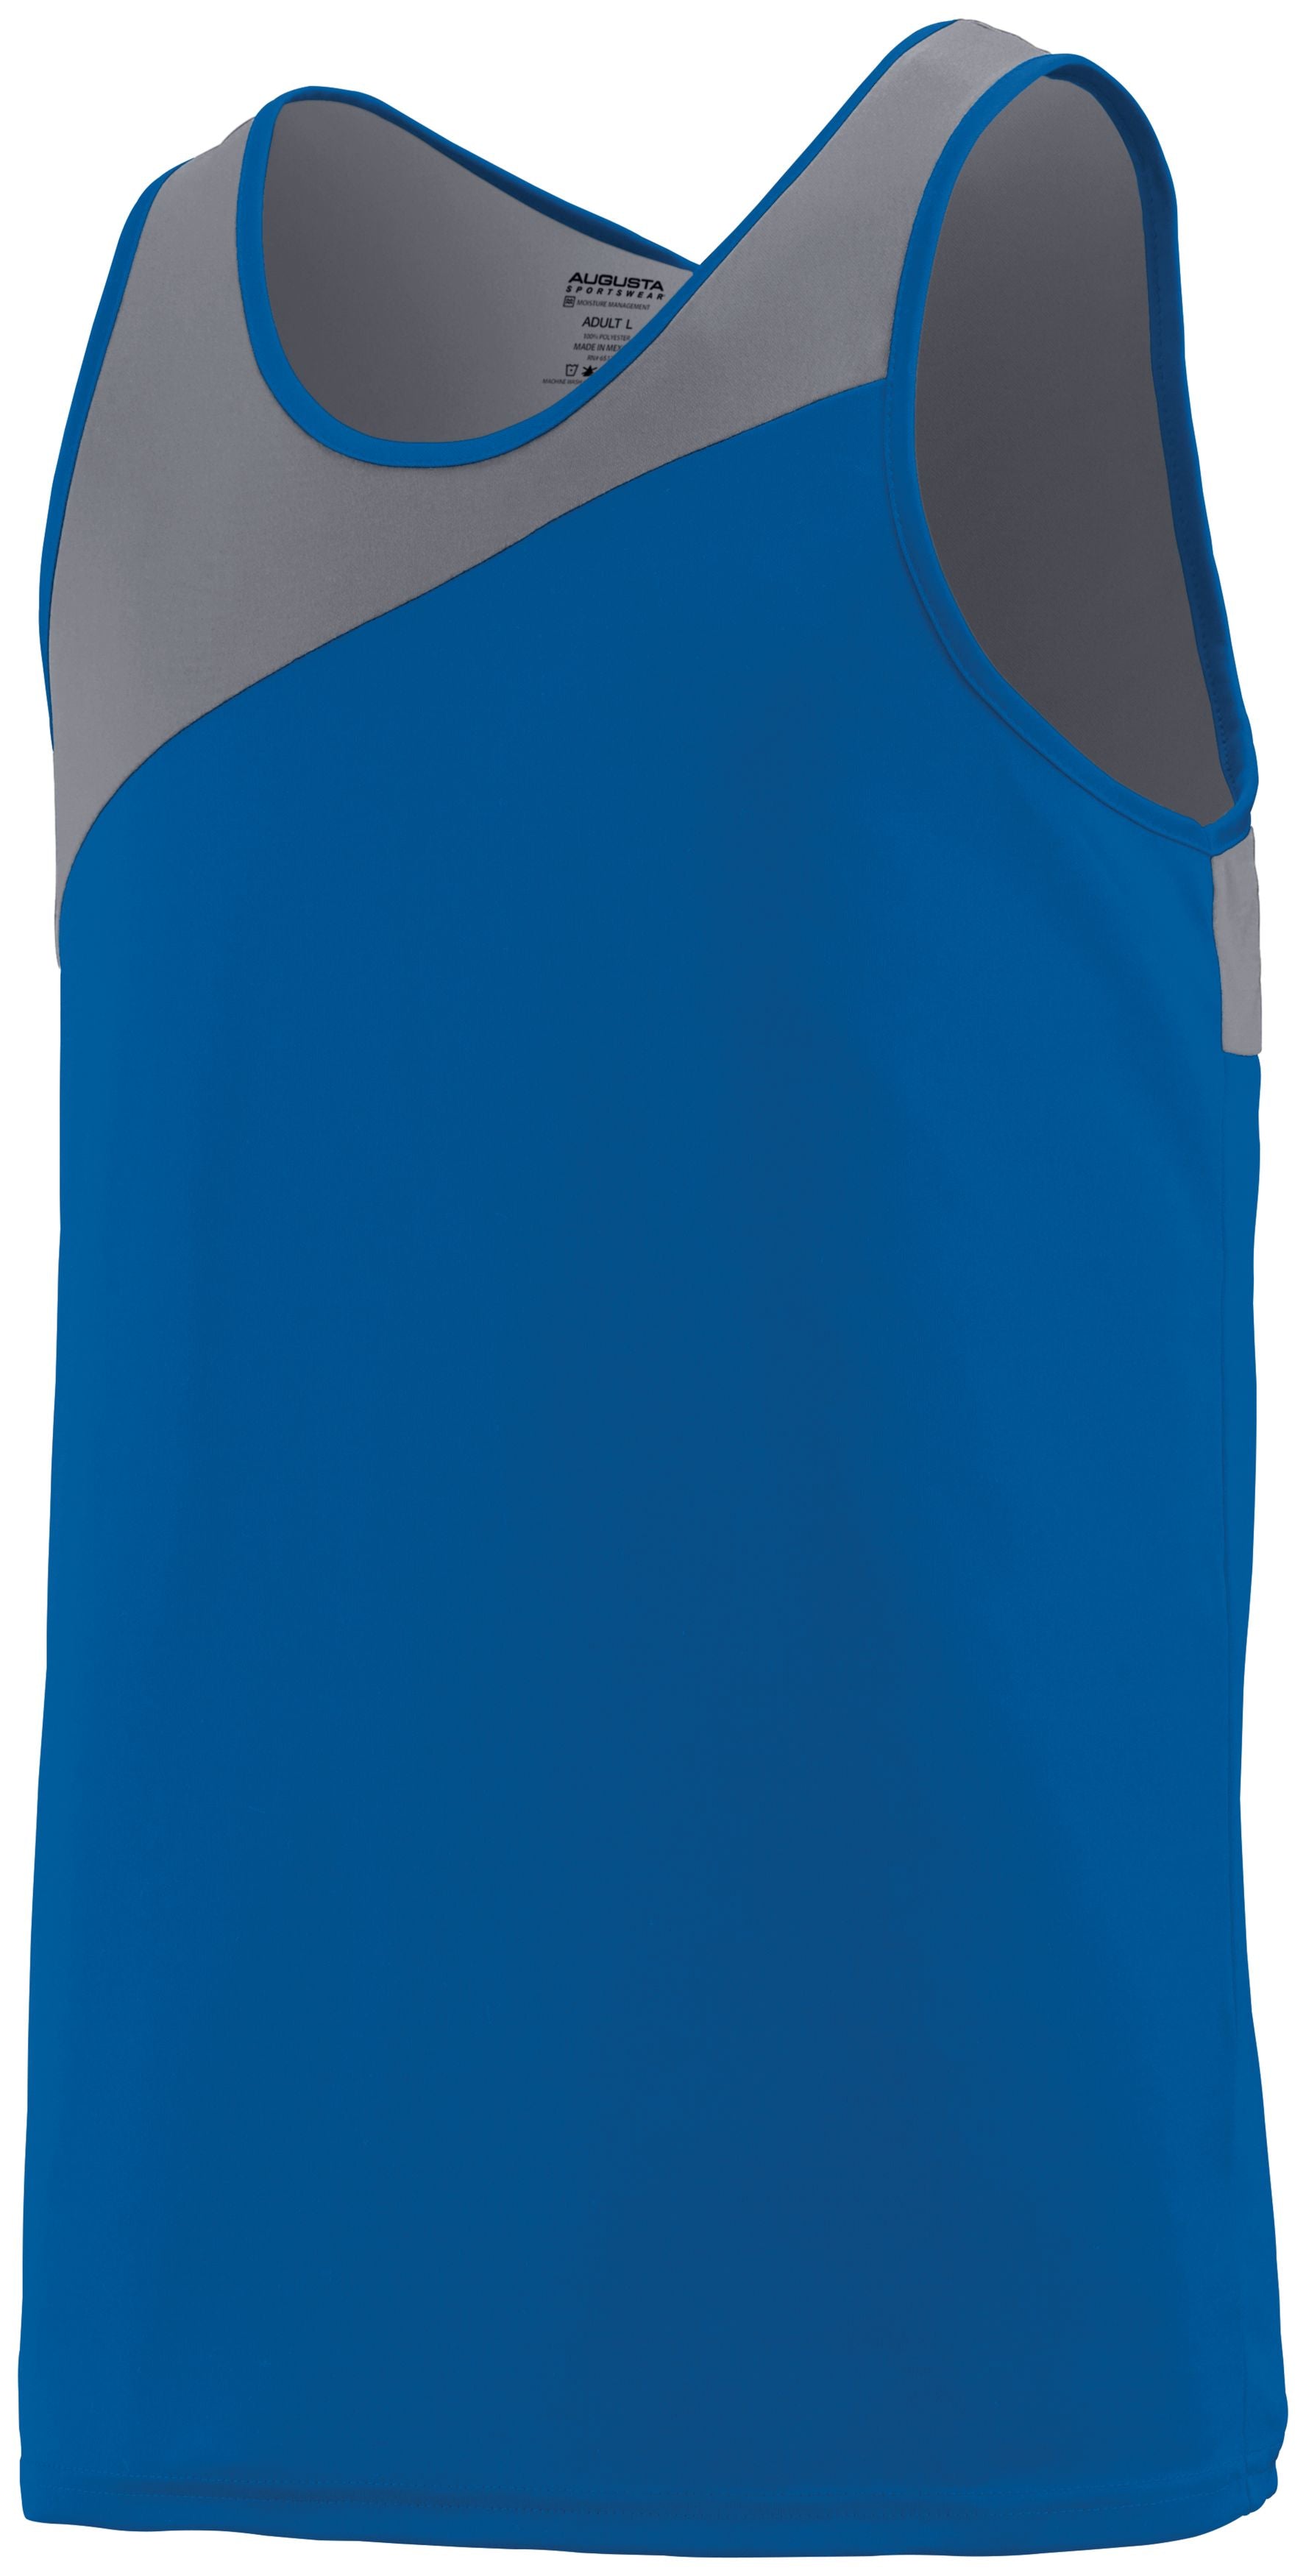 Augusta Sportswear Accelerate Jersey in Royal/Graphite  -Part of the Adult, Adult-Jersey, Augusta-Products, Track-Field, Shirts product lines at KanaleyCreations.com